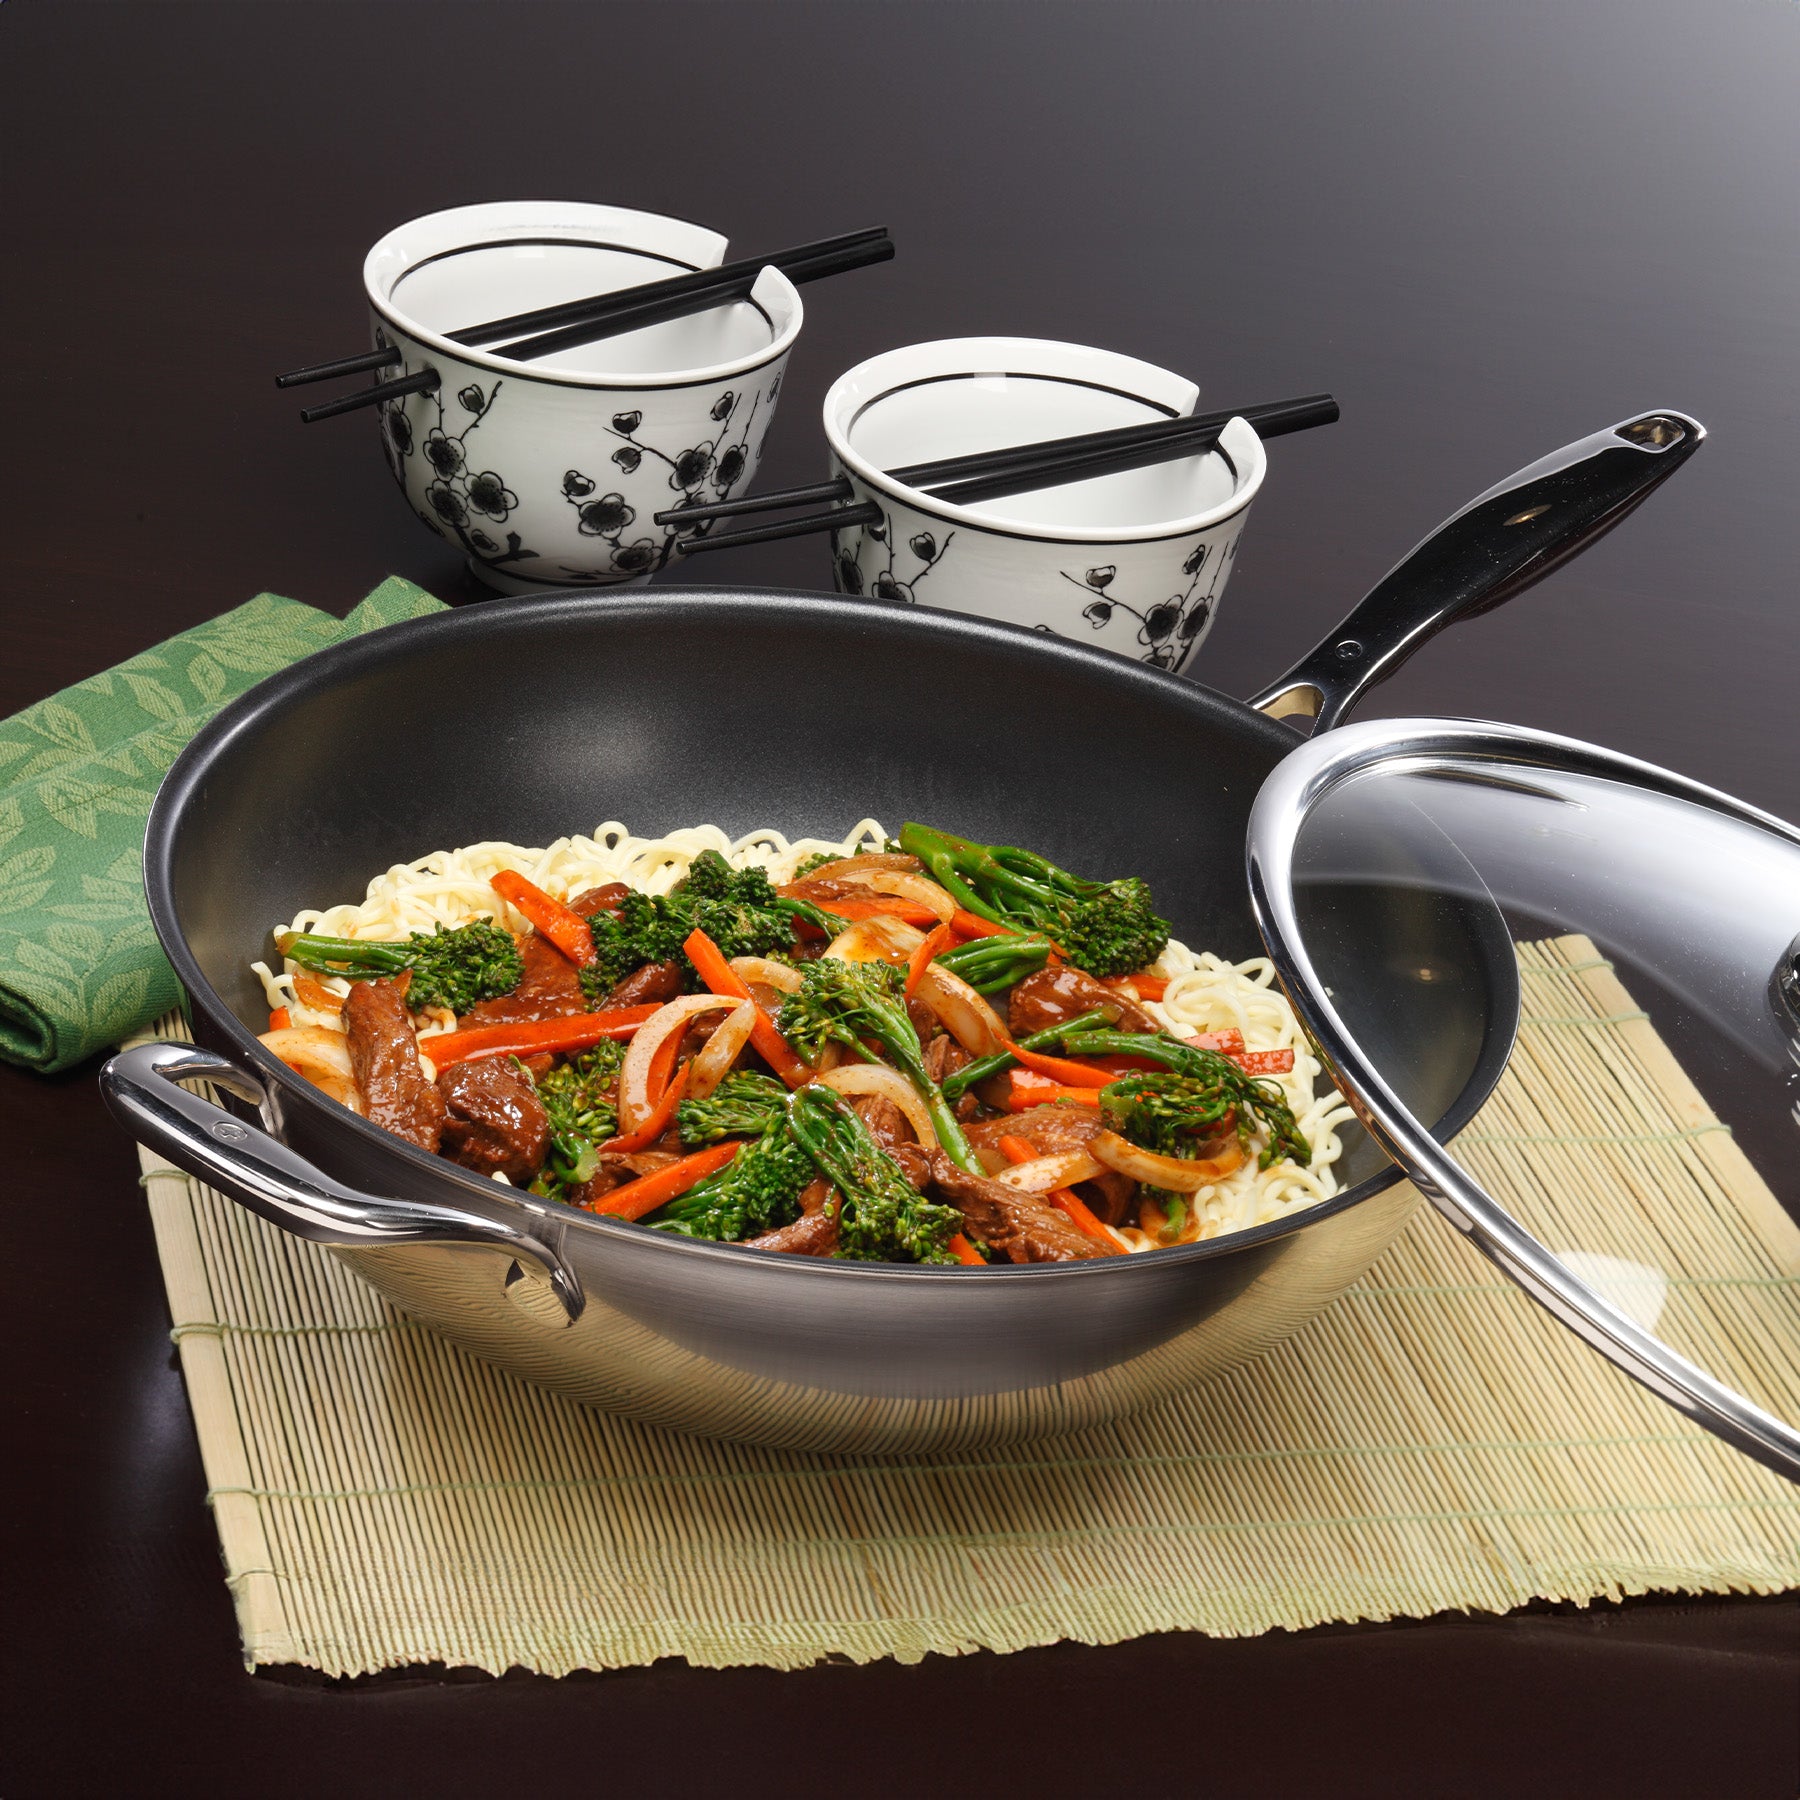 Nonstick Clad 12.5" Wok with Glass Lid - Induction in use on black kitchen counter